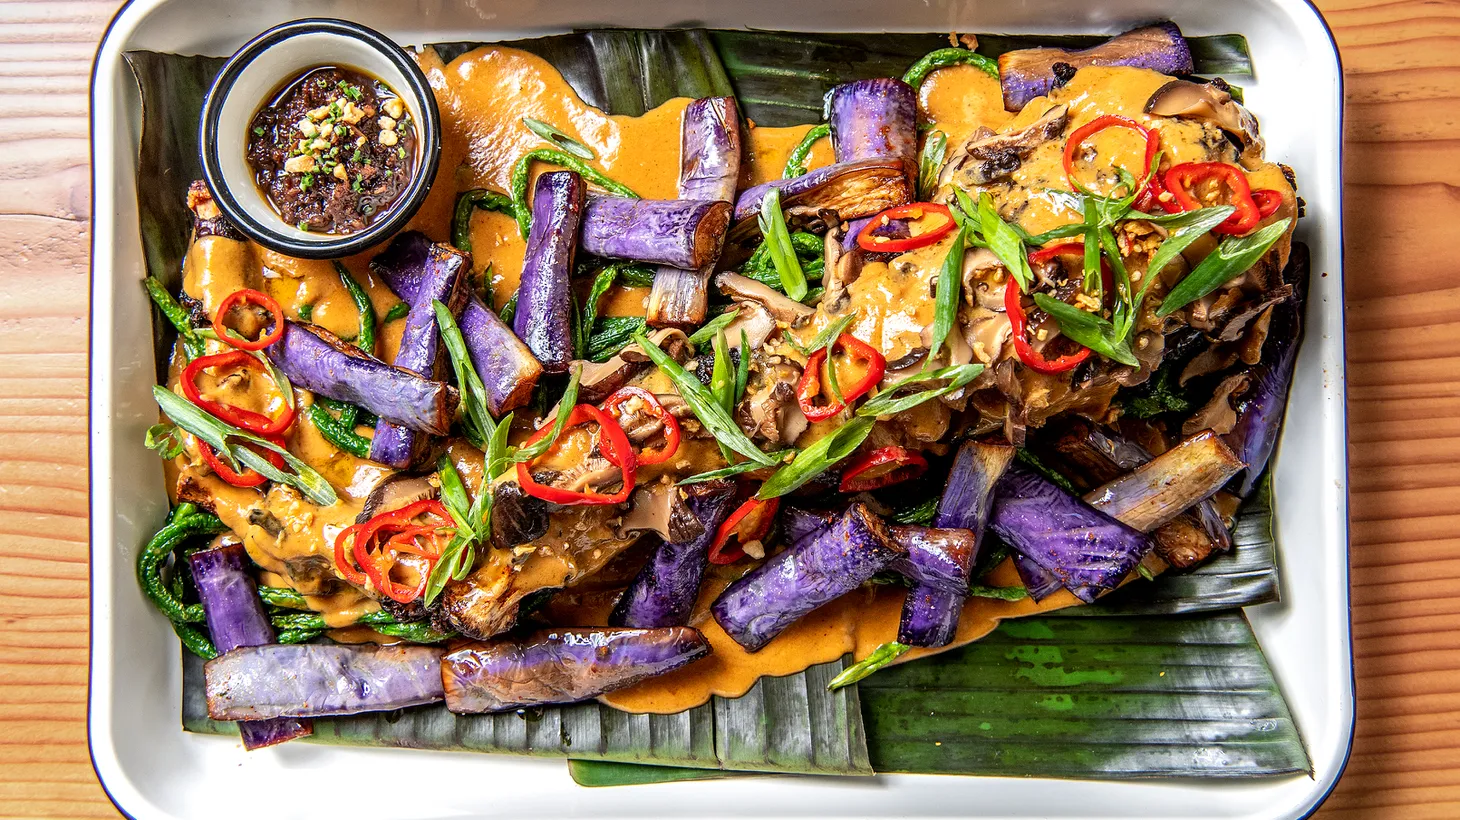 Lord Maynard Llera began cooking in his garage in La Cañada Flintridge before serving up dishes like this oxtail kare kare in his Melrose Hill restaurant.